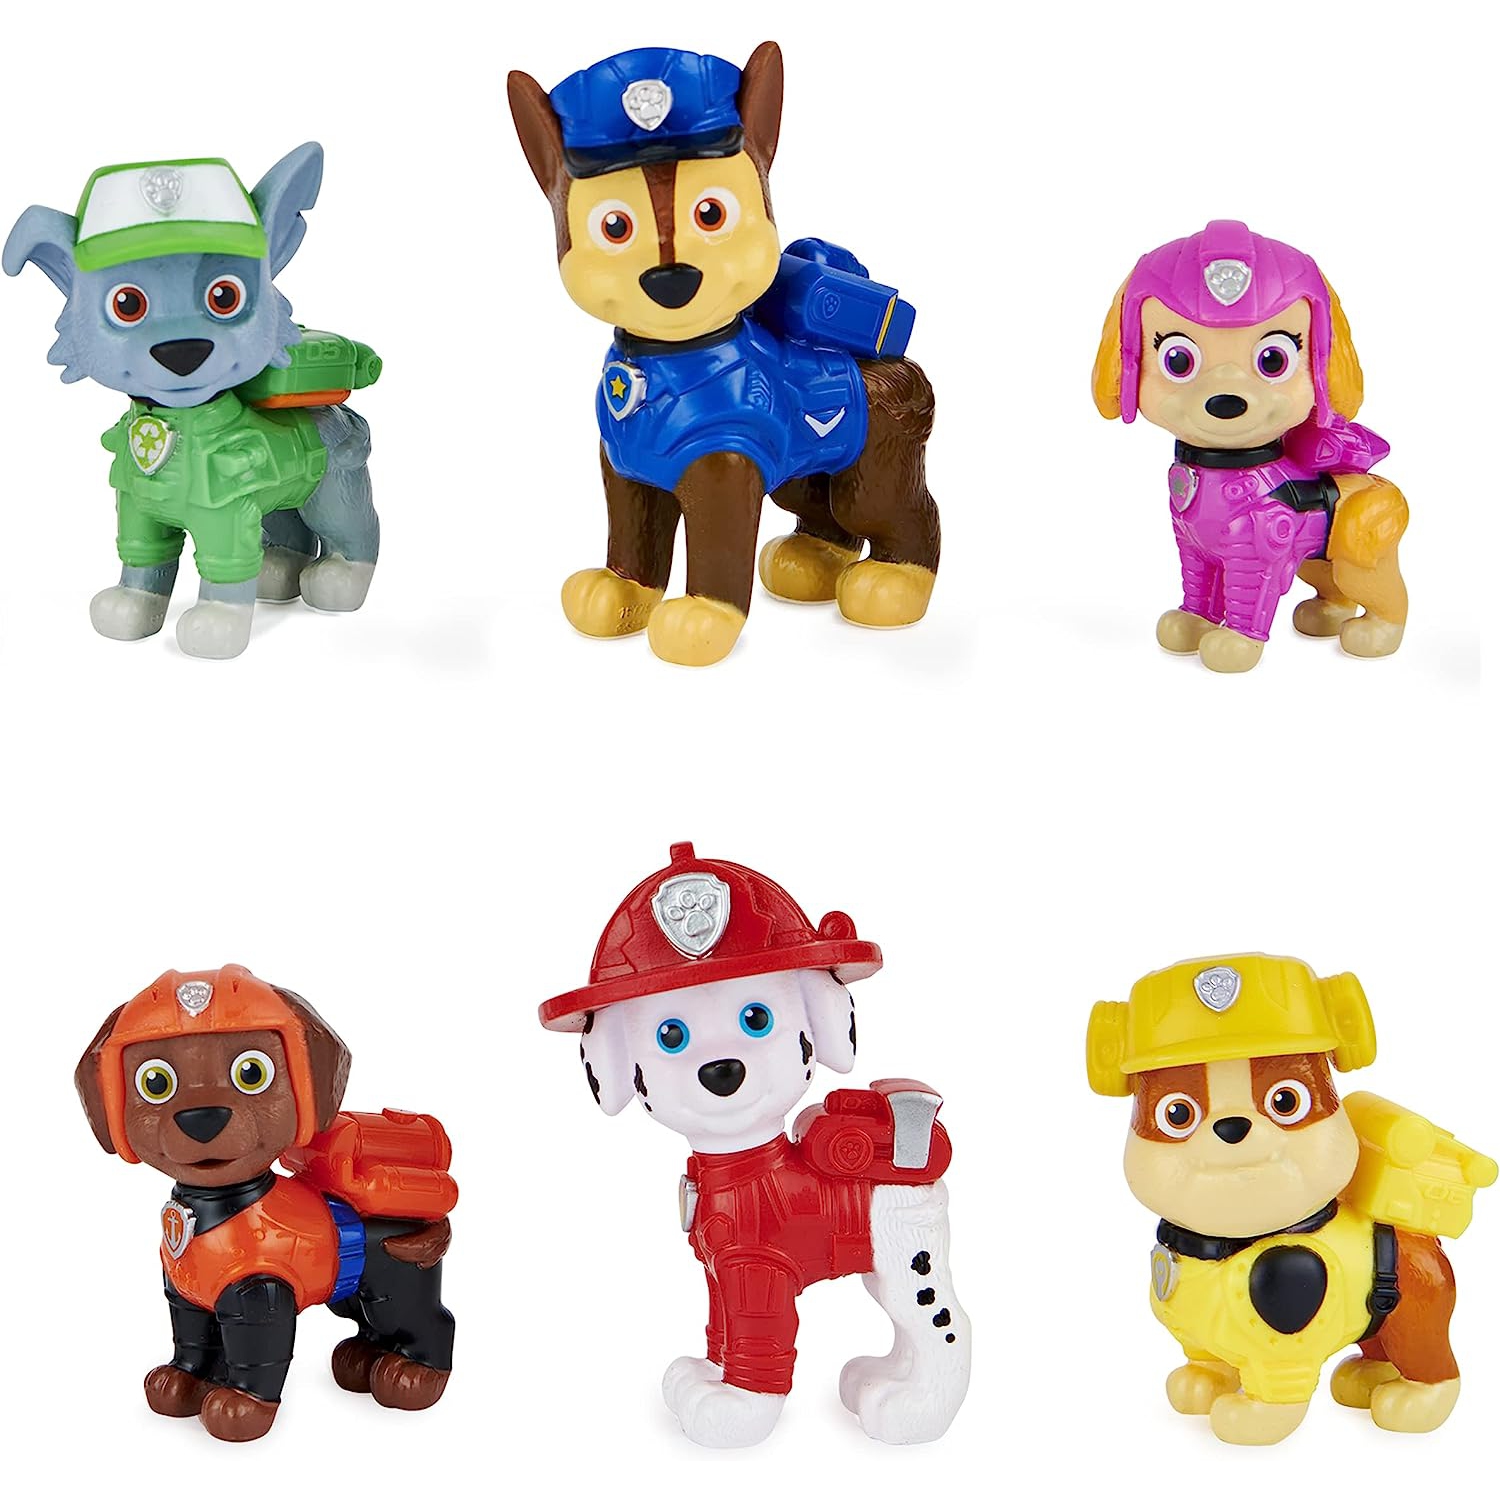 Open Box - Paw Patrol, Kitty Catastrophe Gift Set with 8 Collectible Toy Figures